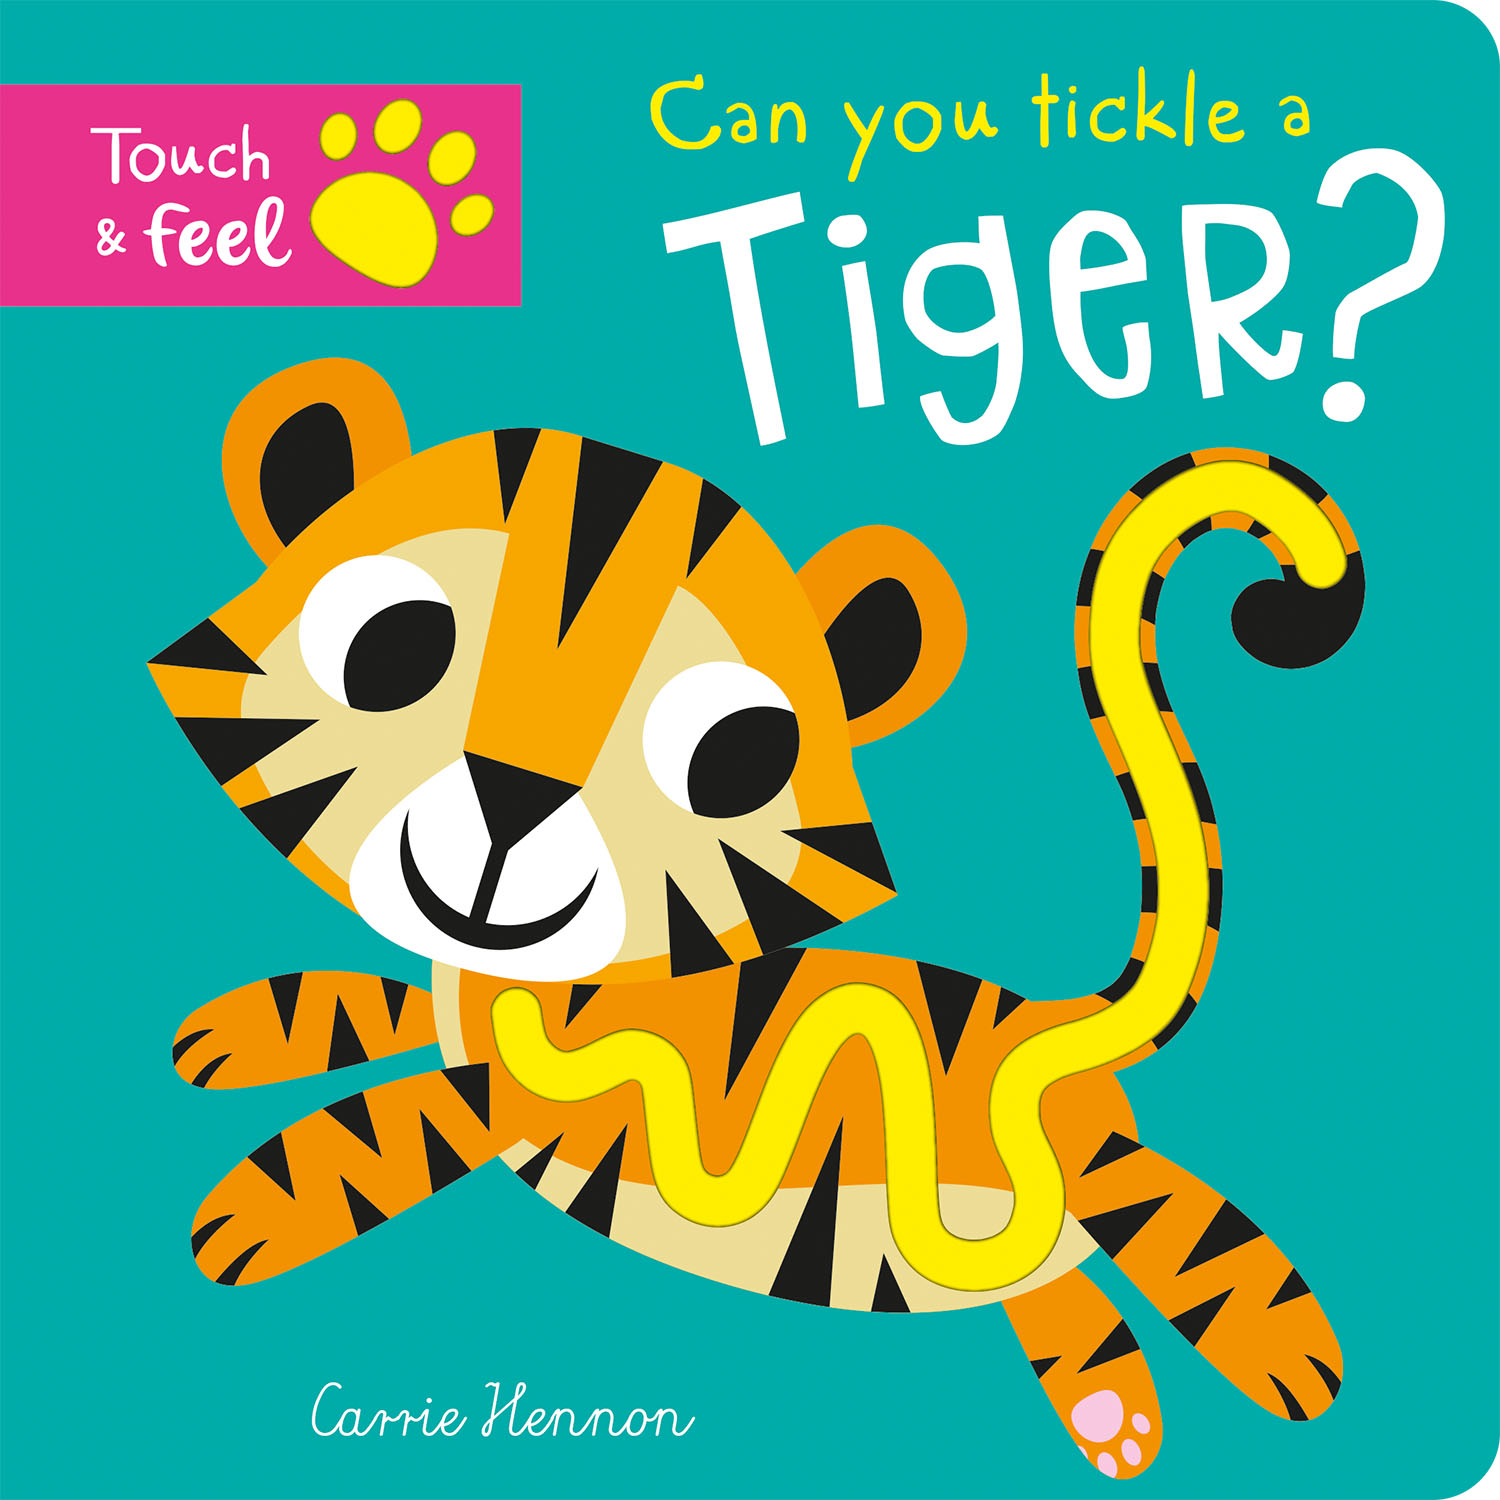 CAN YOU TICKLE A TIGER?